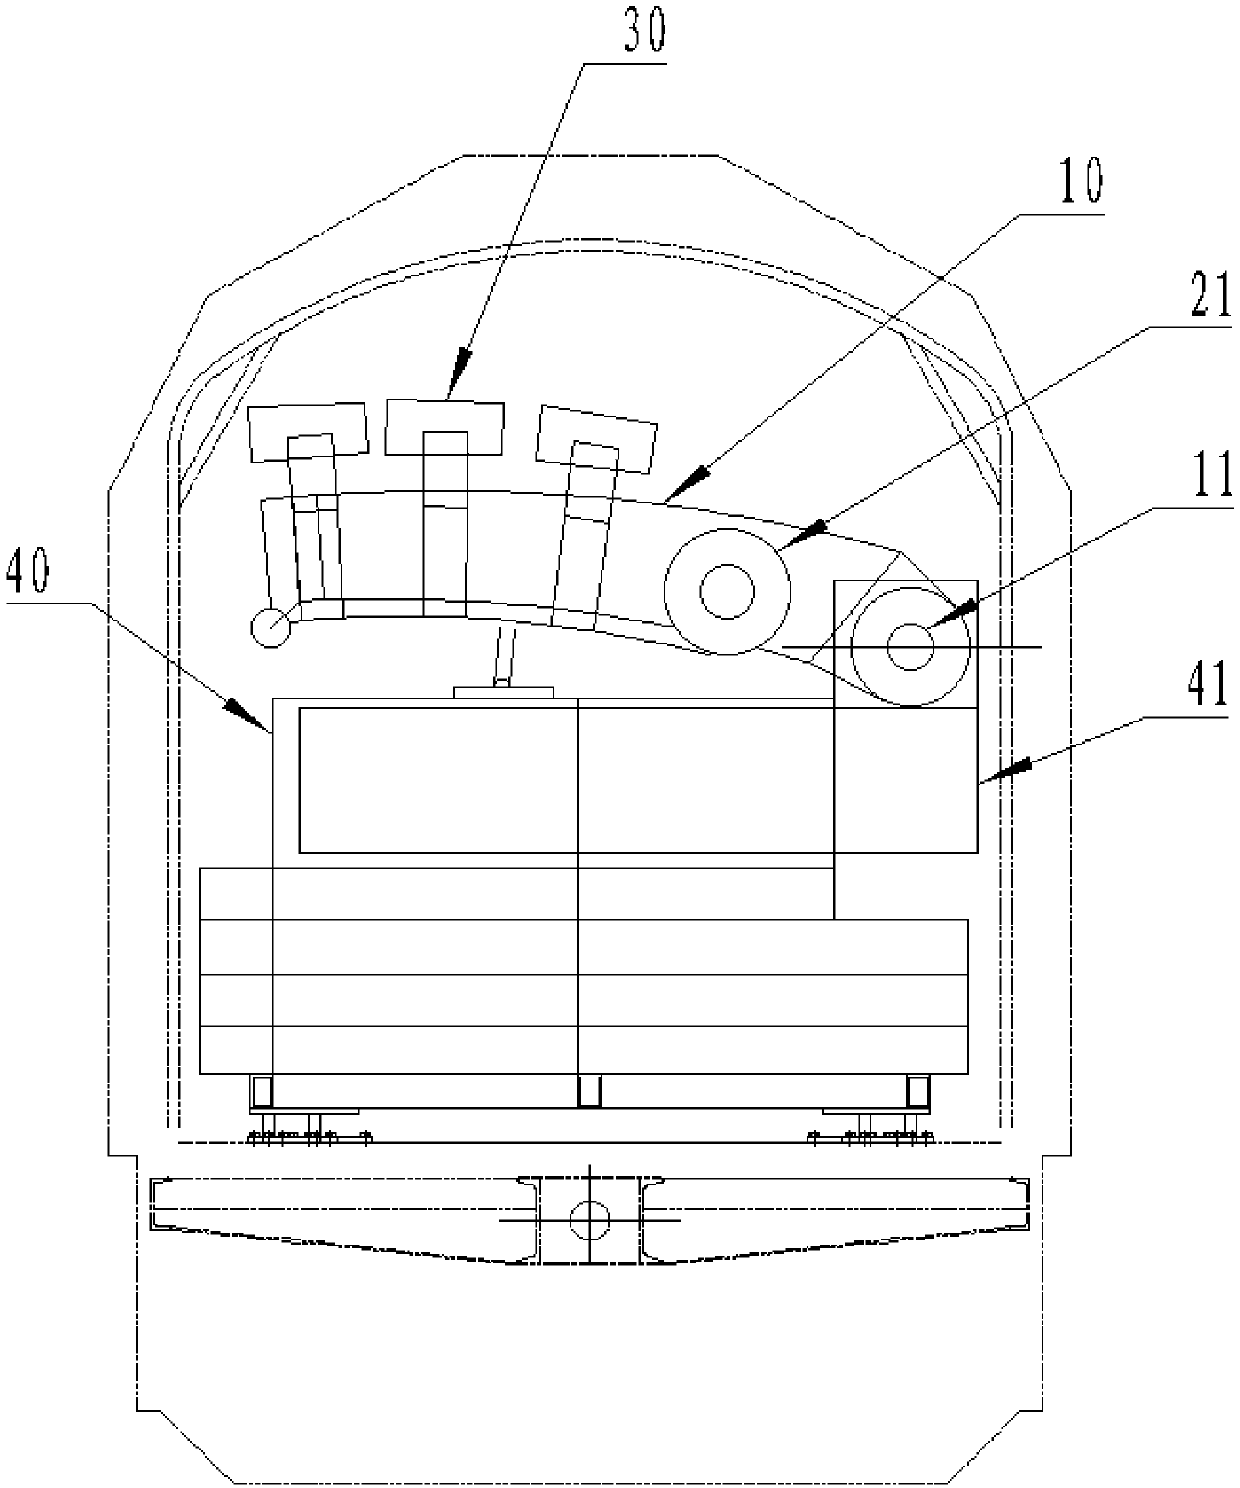 Tunnel lining state detection device